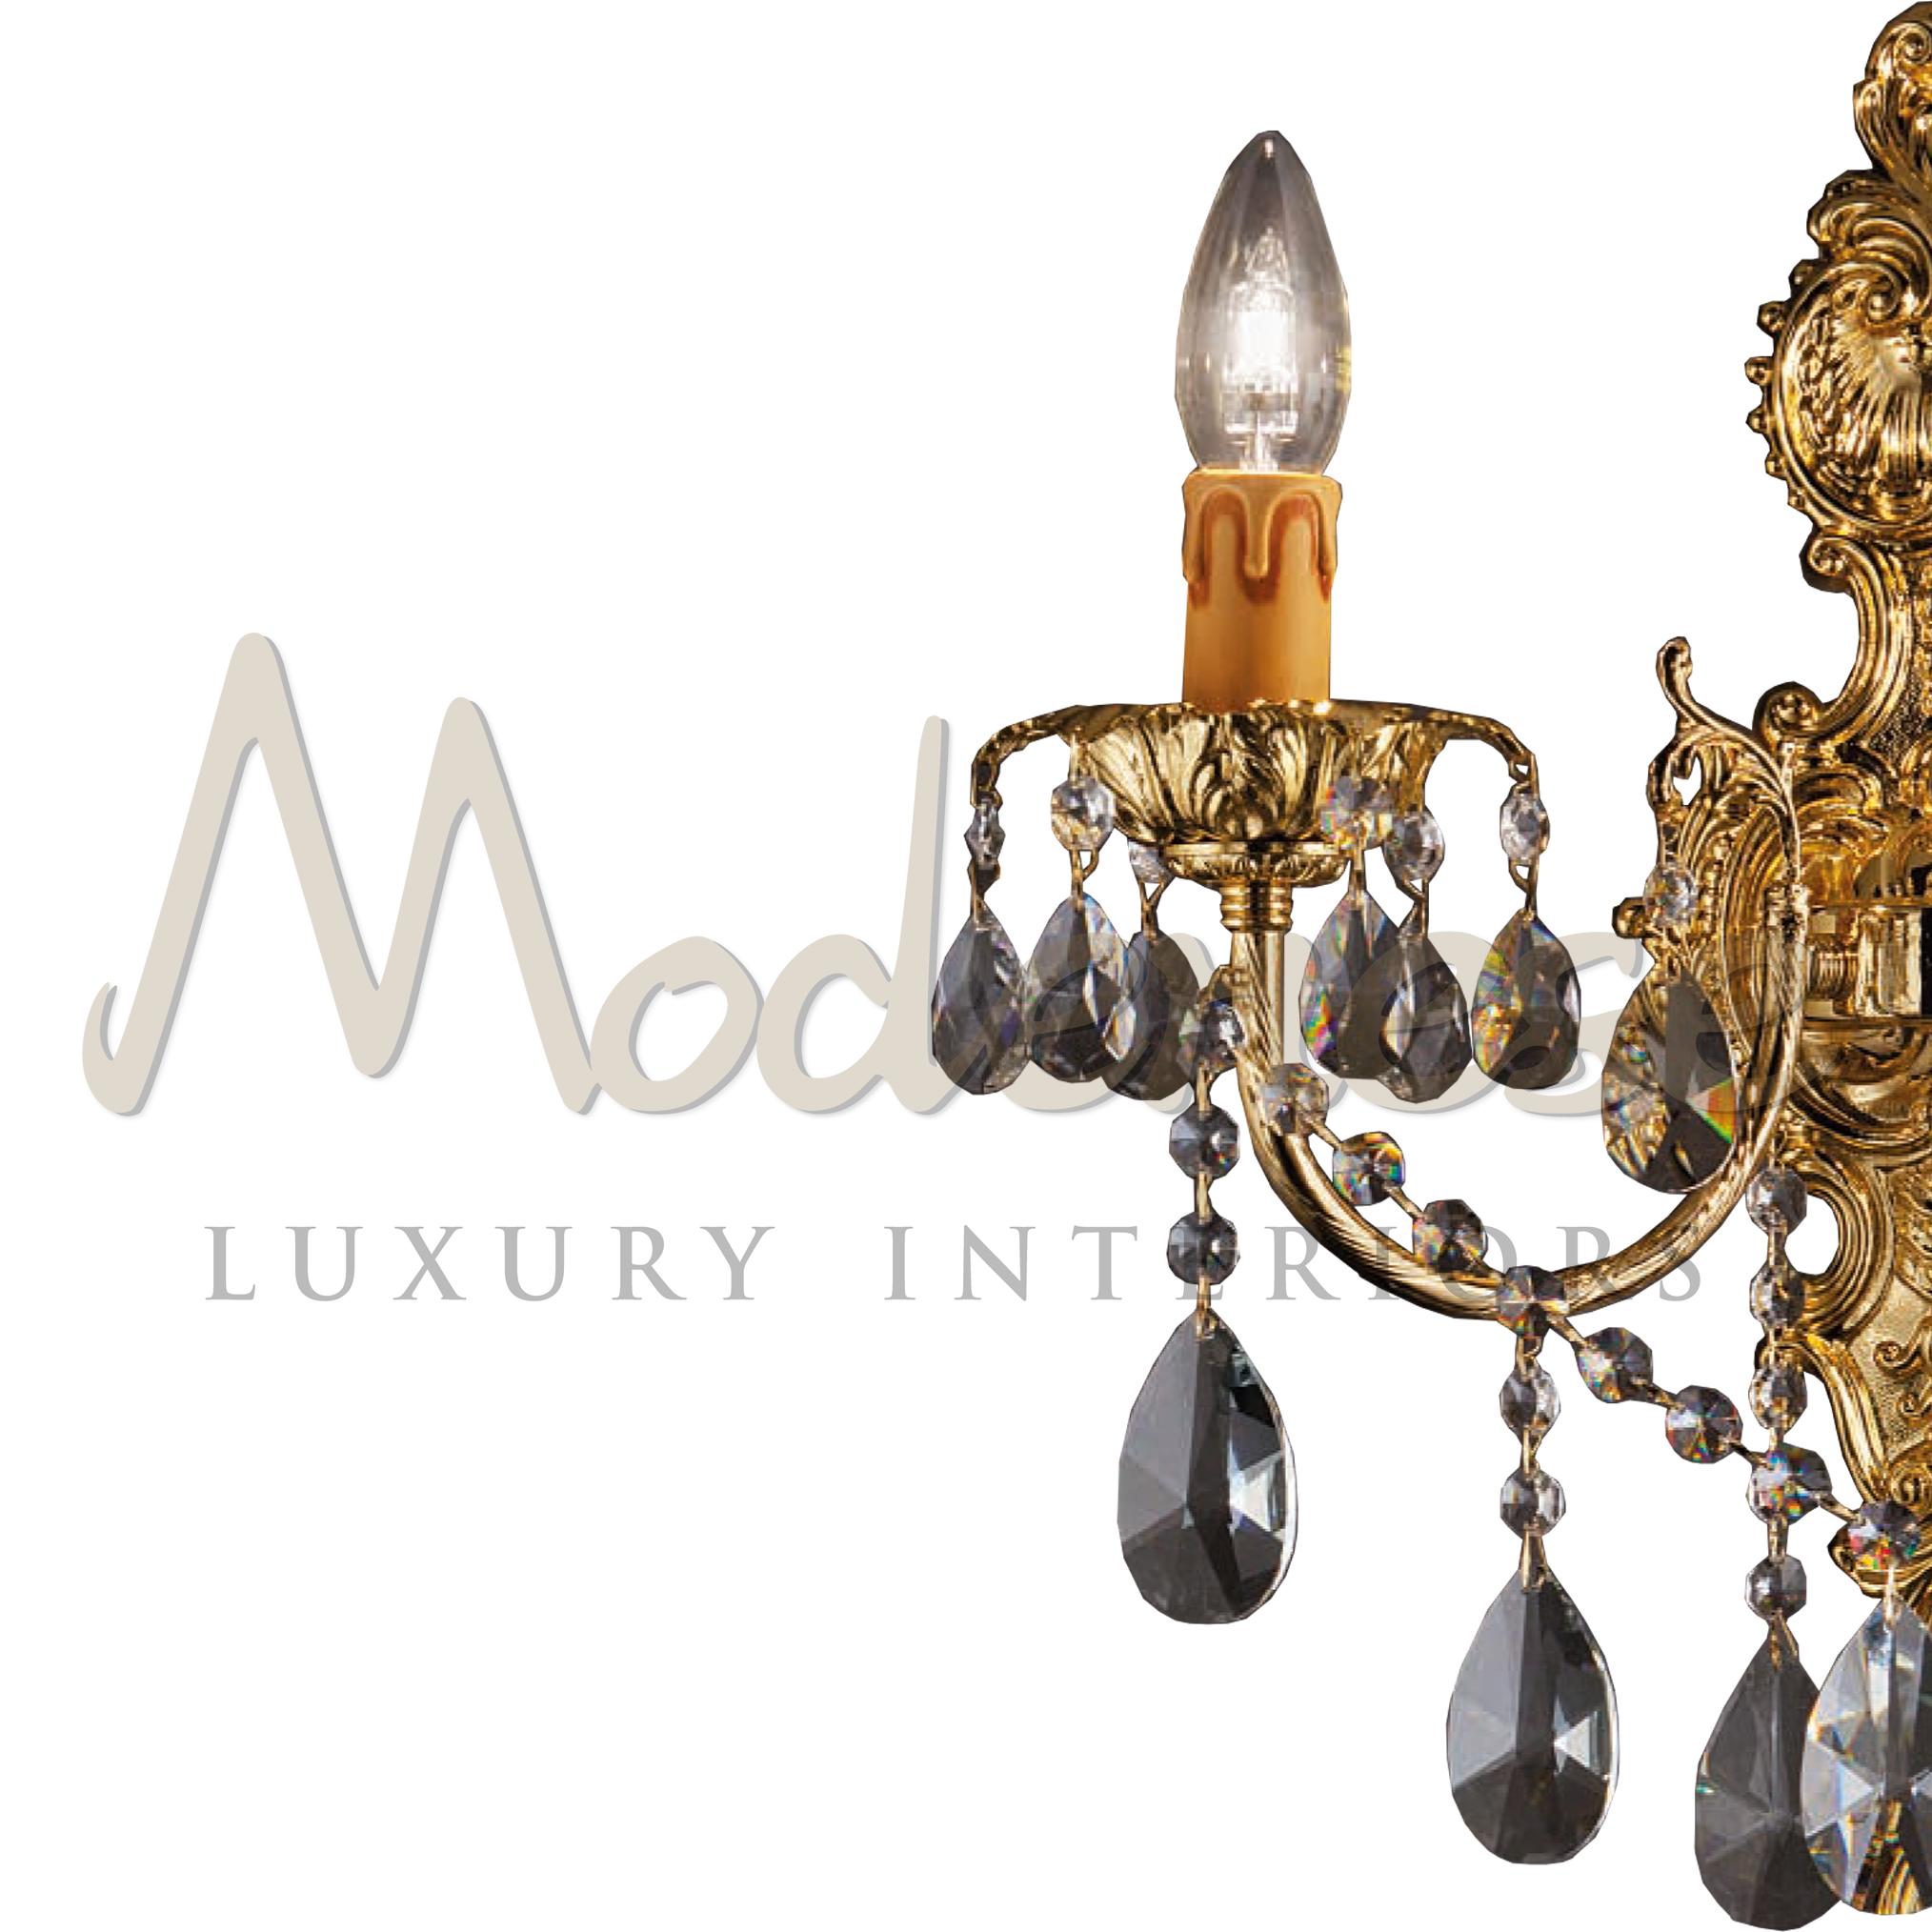 Elegant shiny artistic casting wall sconce by Modenese Gastone Luxury Interiors. Mainly used in bespoke residential projects, this scrupulously moulded wall sconce features a baroque two arms structure completed by a magnificent composition of